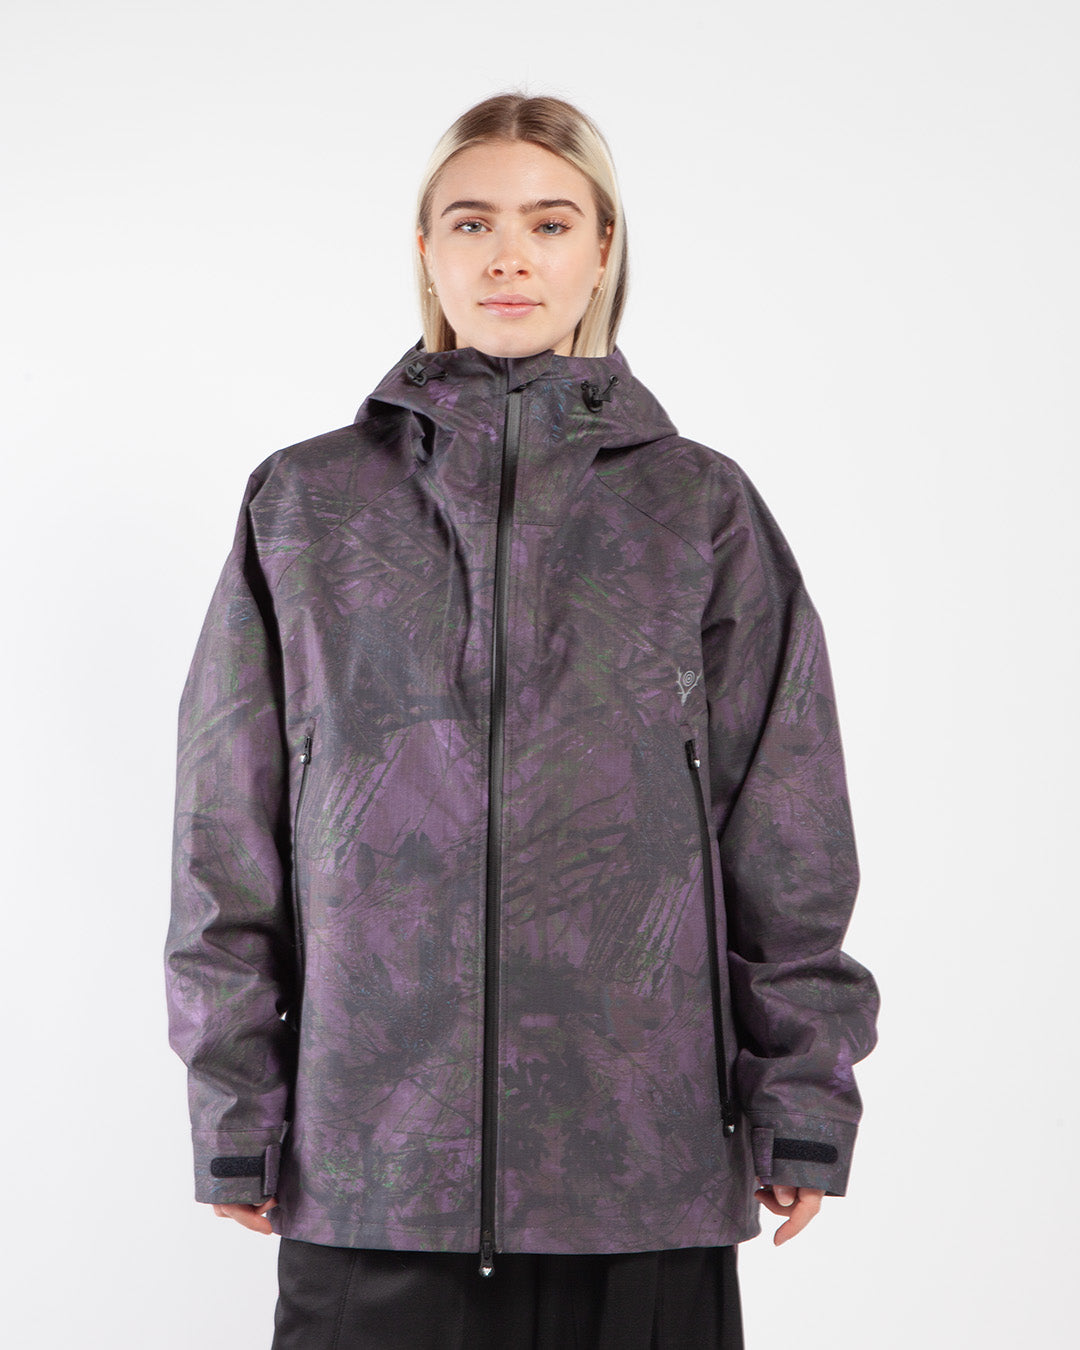 South2 West8 Weather Effect Jacket